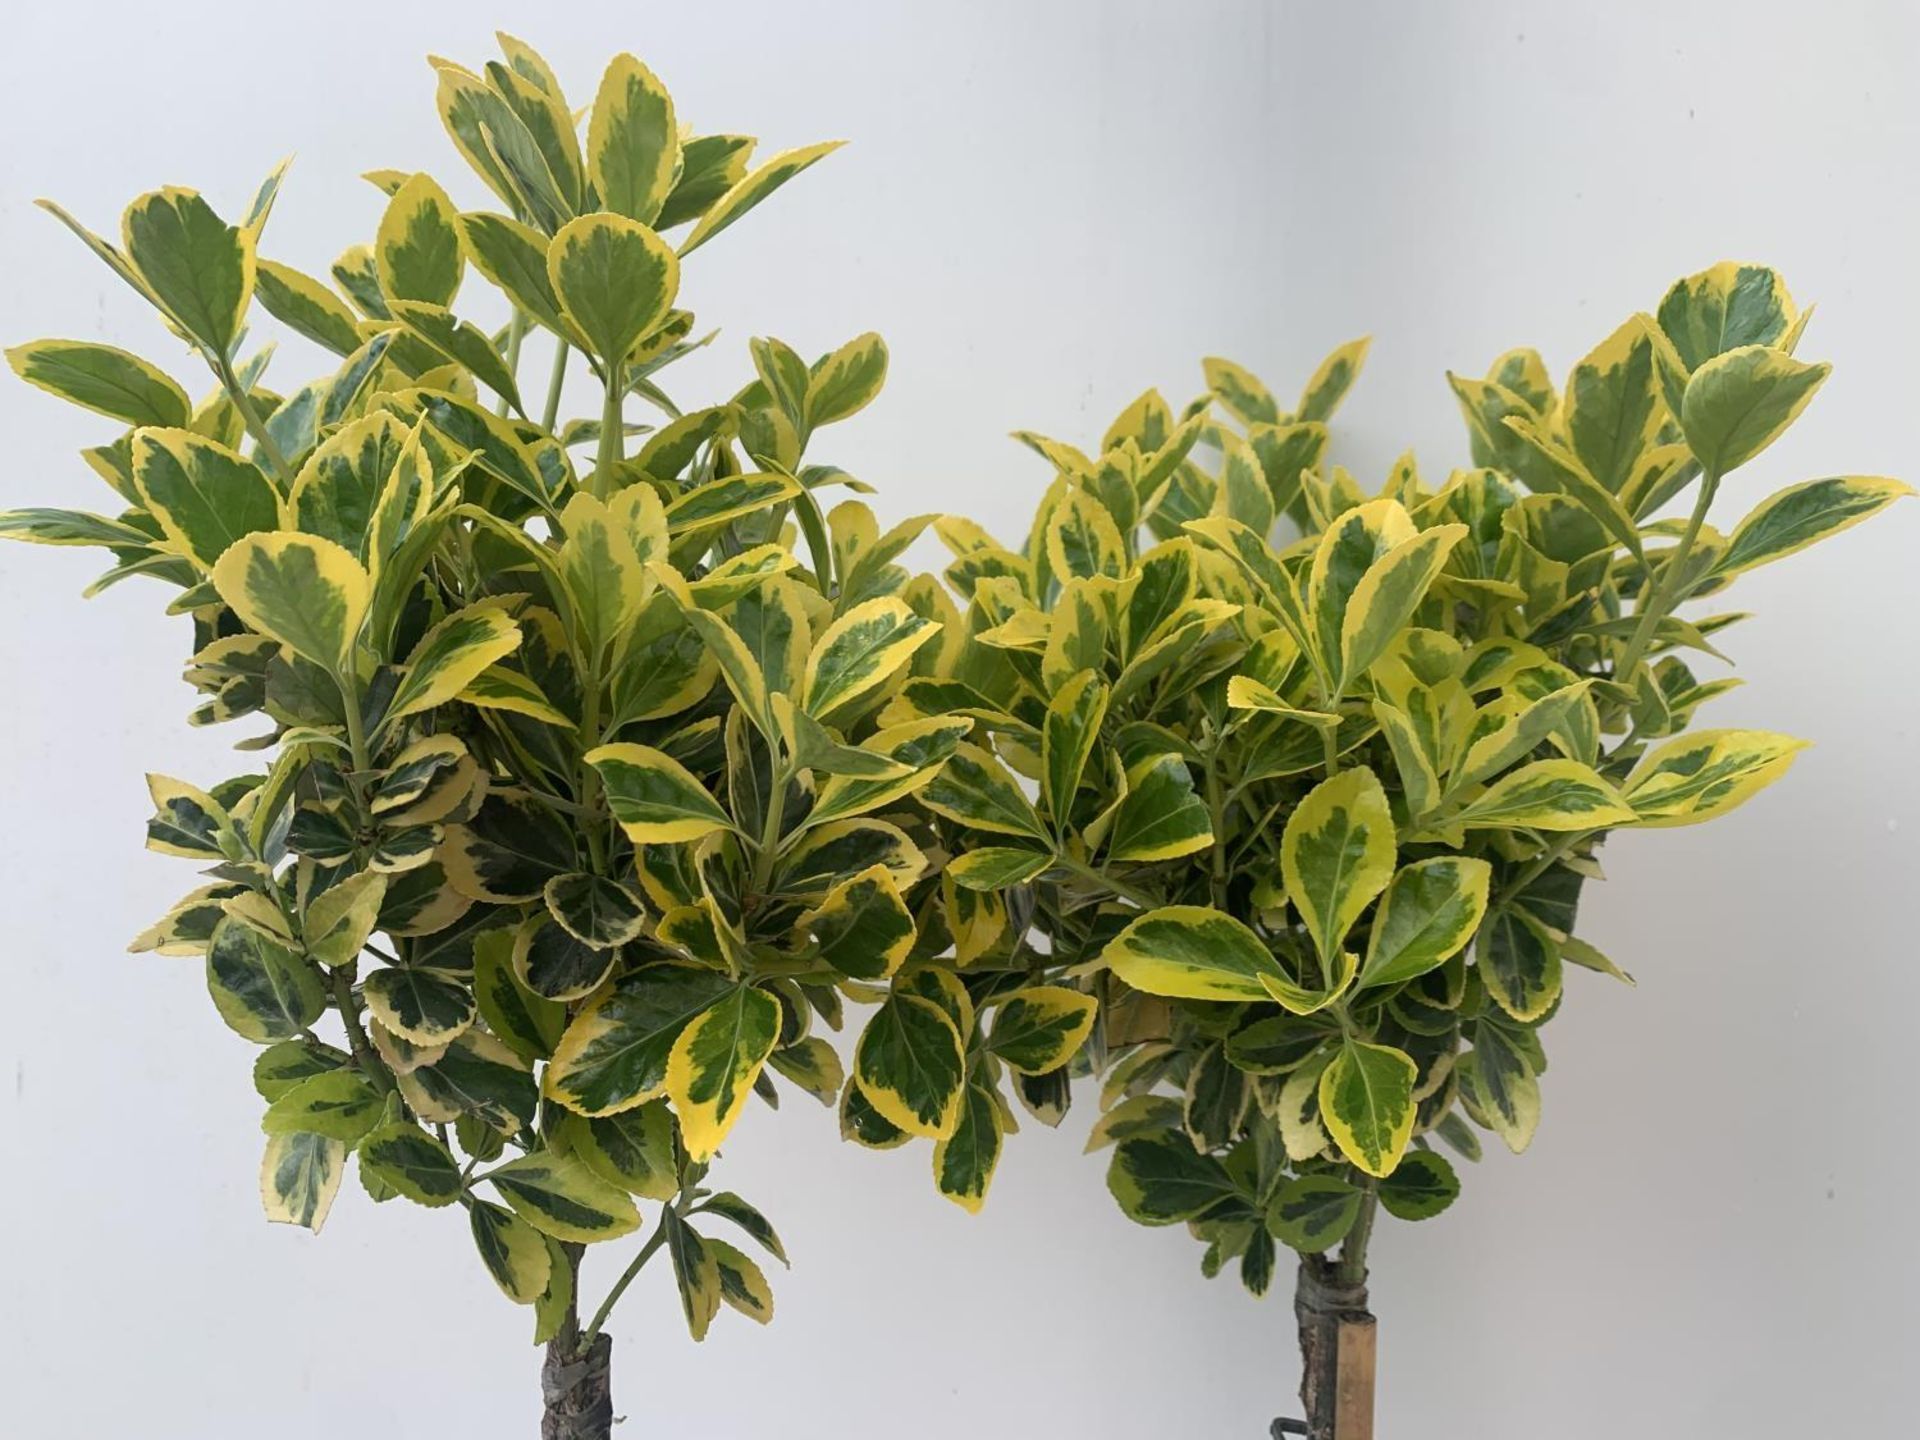 TWO STANDARD EUONYMUS JAPONICUS 'MARIEKE' IN 3 LTR POTS APPROX A METRE IN HEIGHT PLUS VAT TO BE SOLD - Image 3 of 5